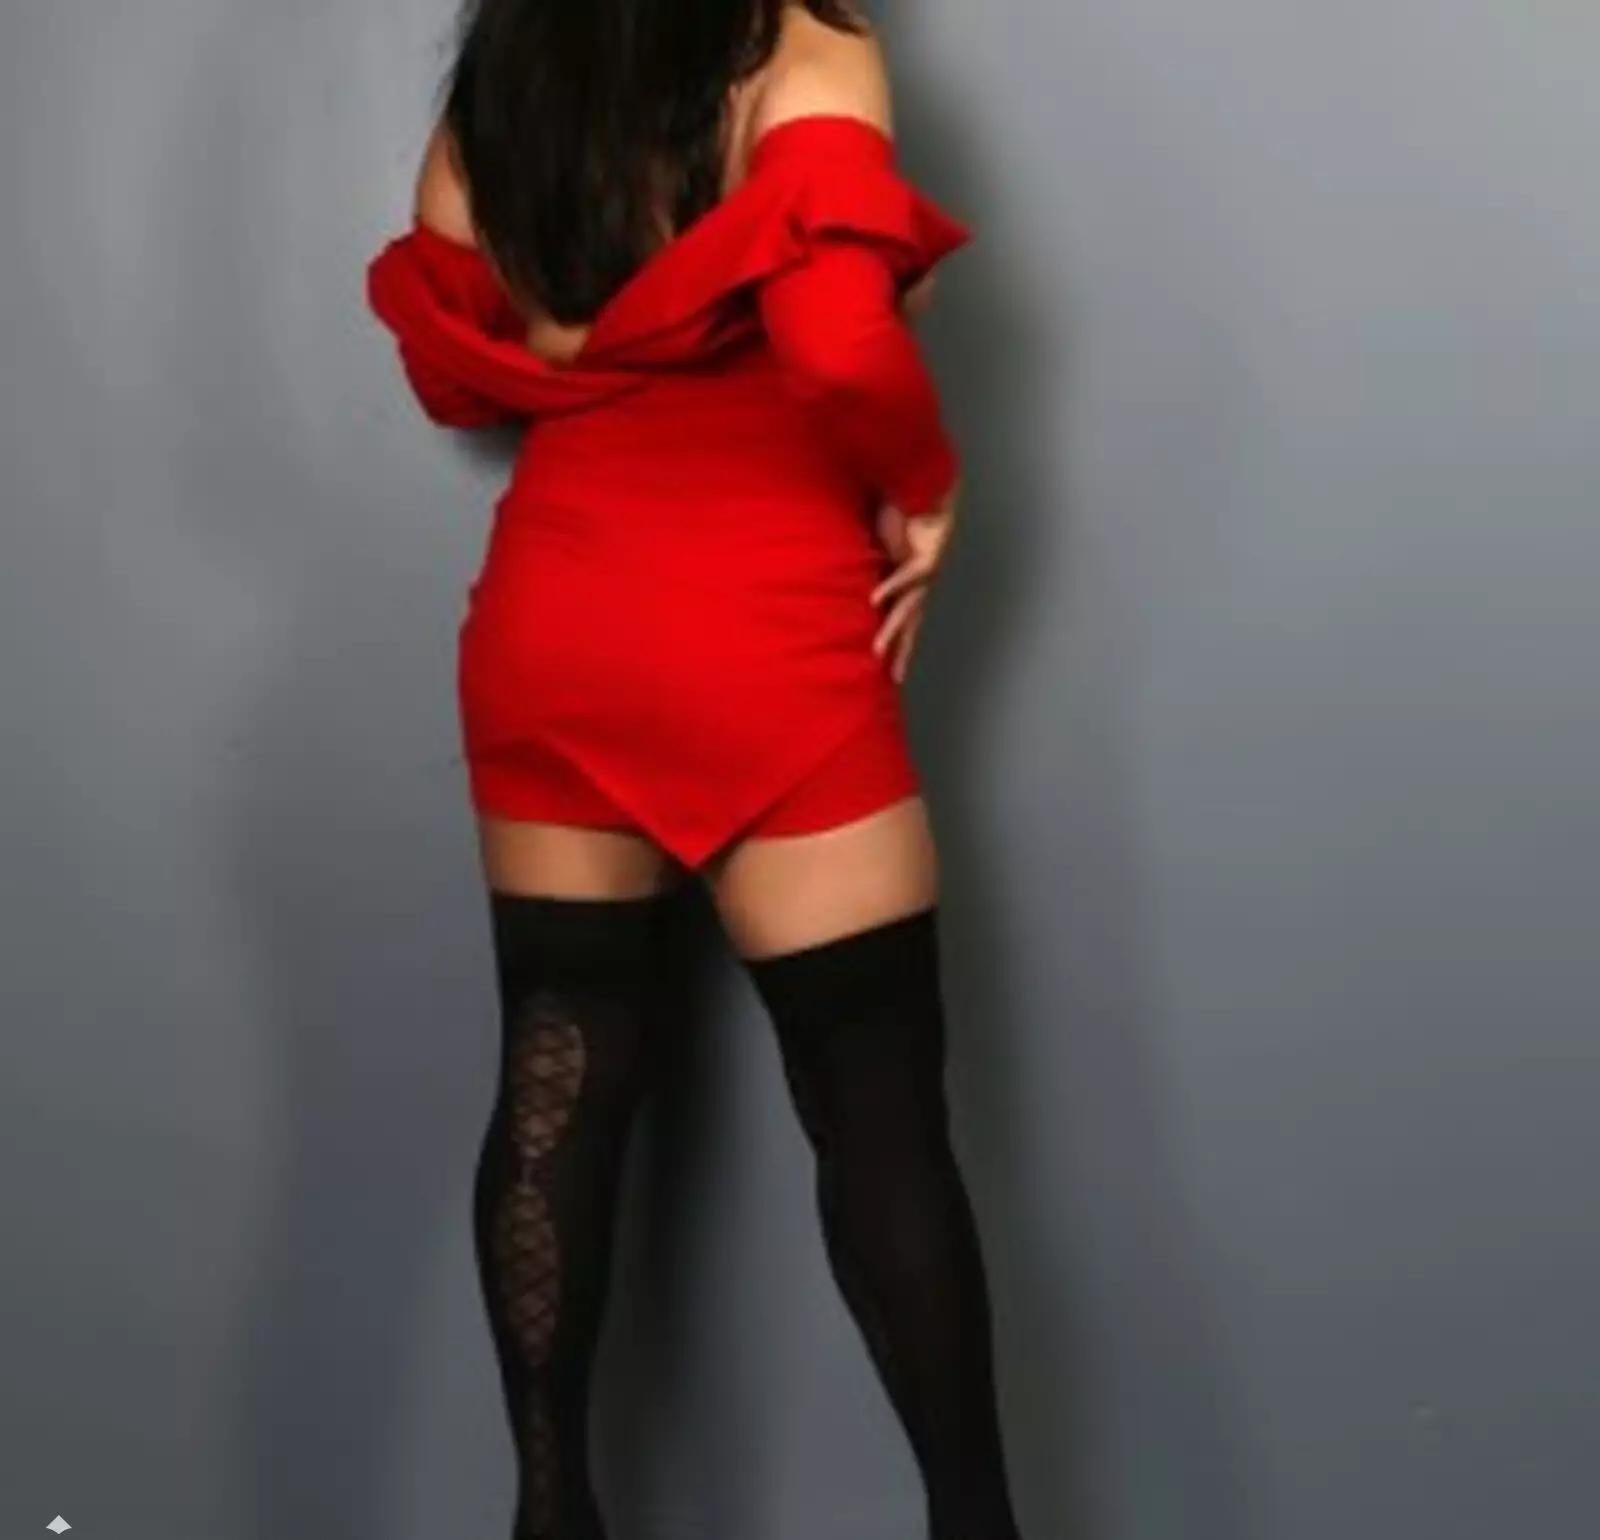 Find Best Escort Near You! - city the-hague